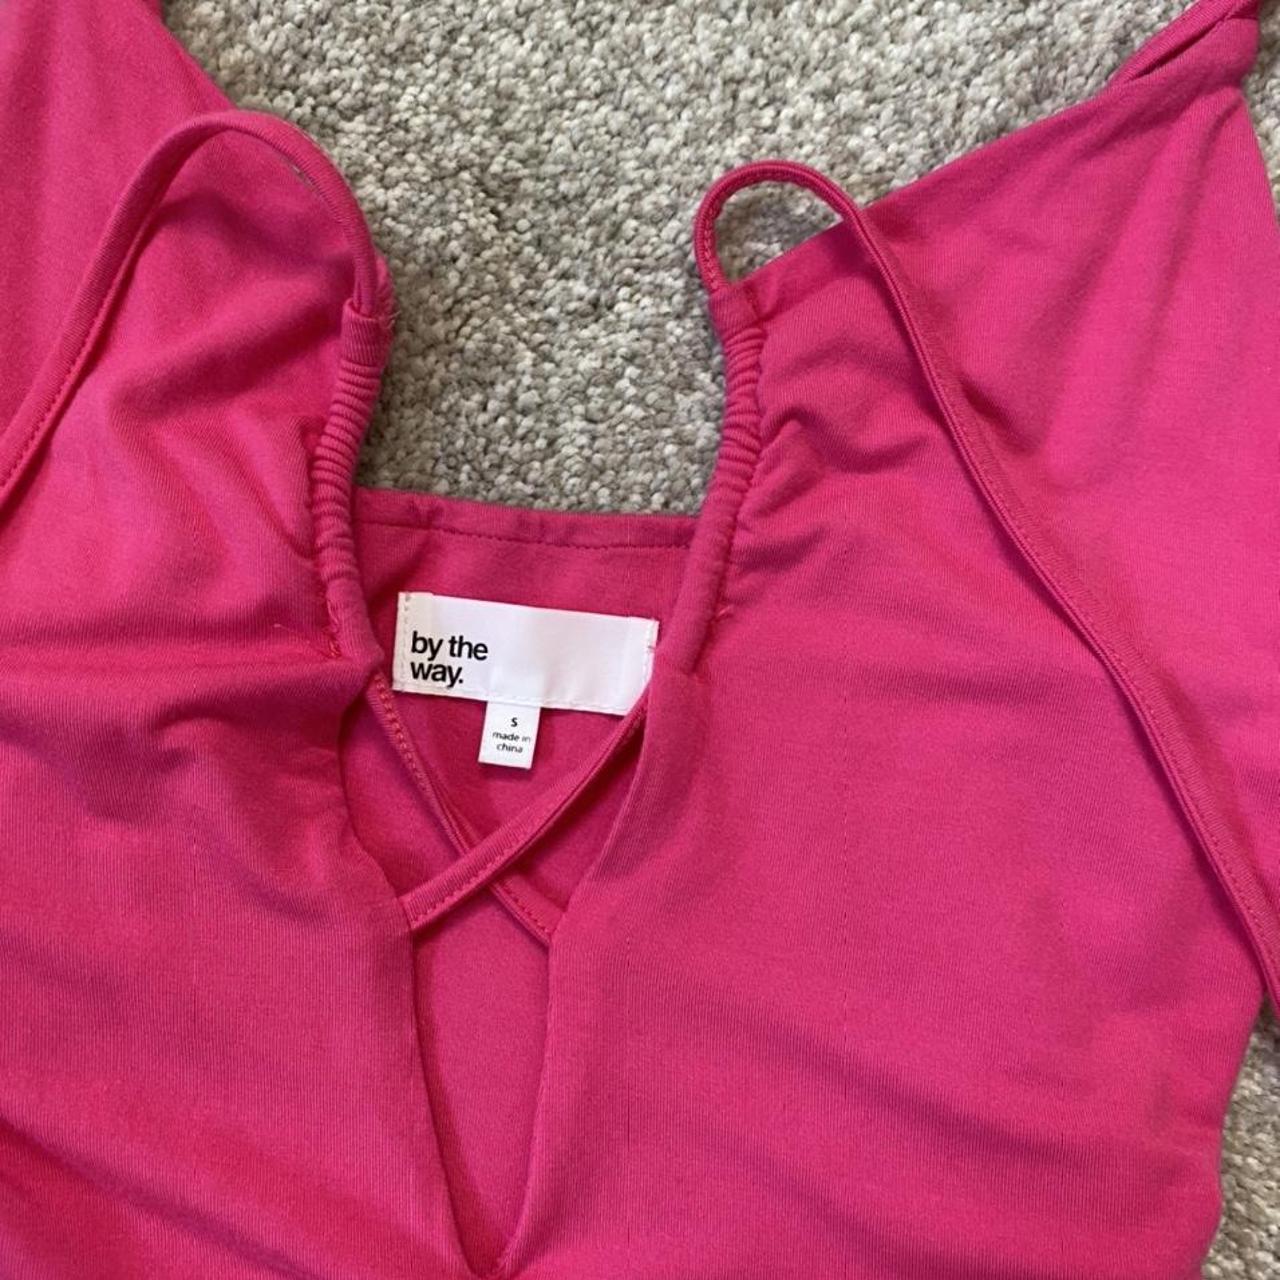 By The Way. Revolve sexy Hot Pink Front tie strappy - Depop